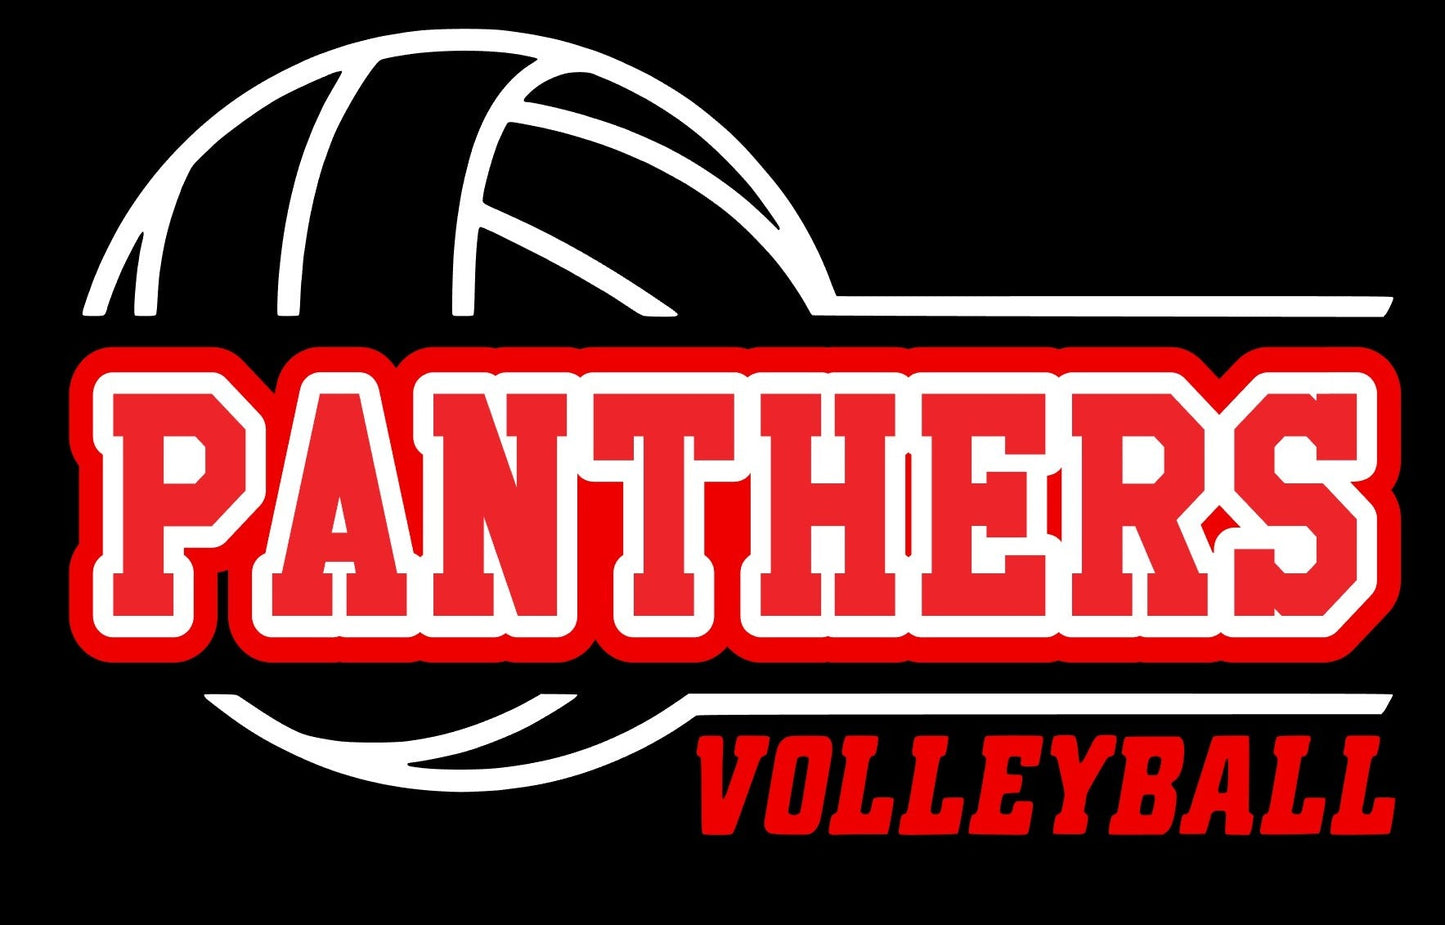 * Panthers Volleyball Decal